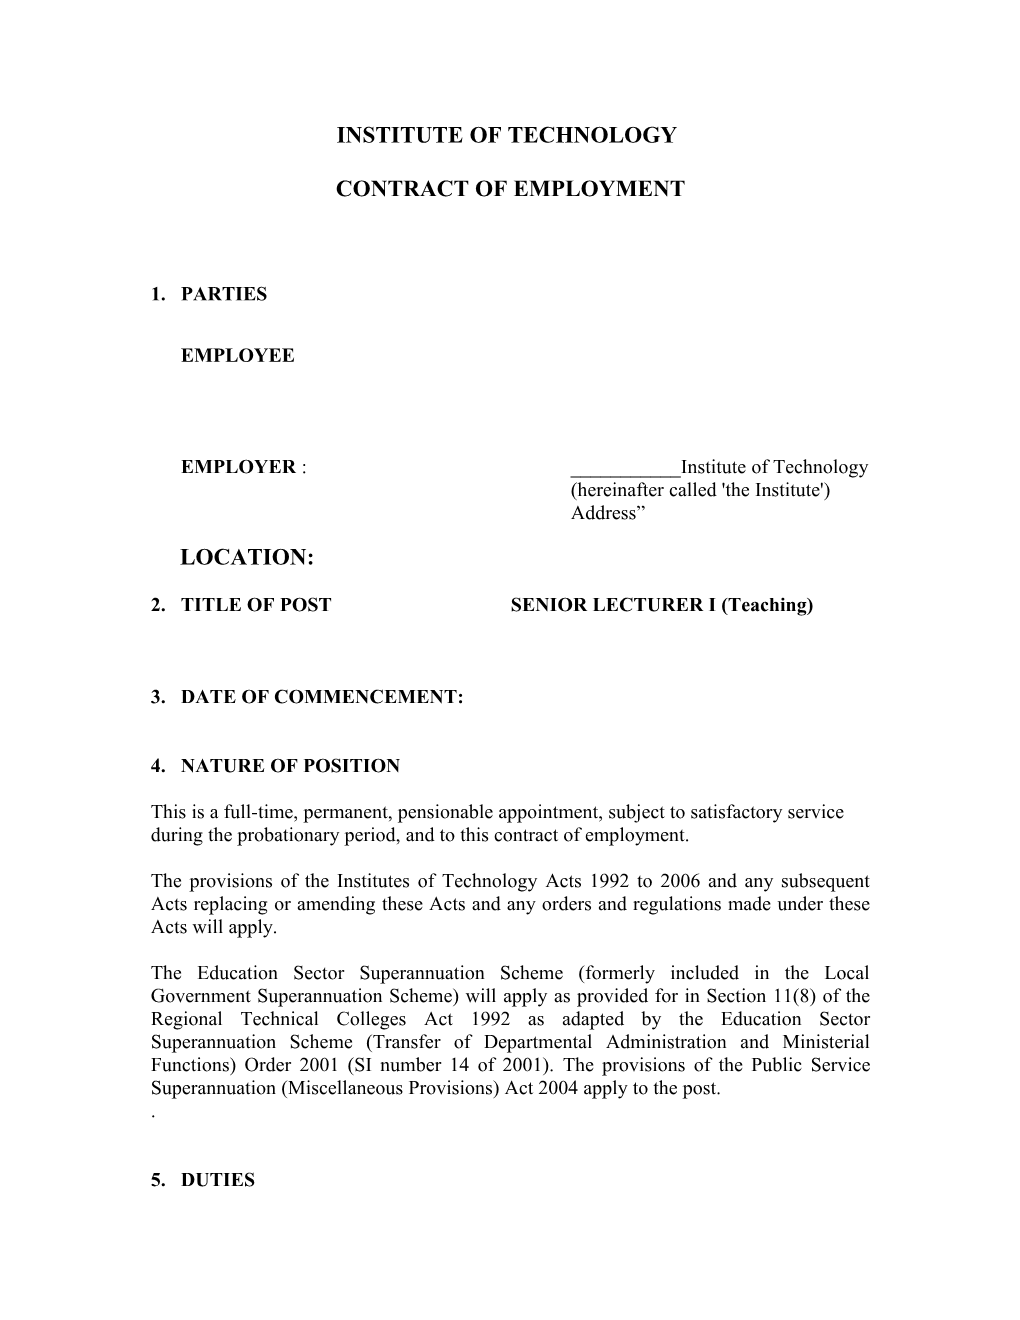 Contract of Employment - PWT SL I (T) - Iot - 2007